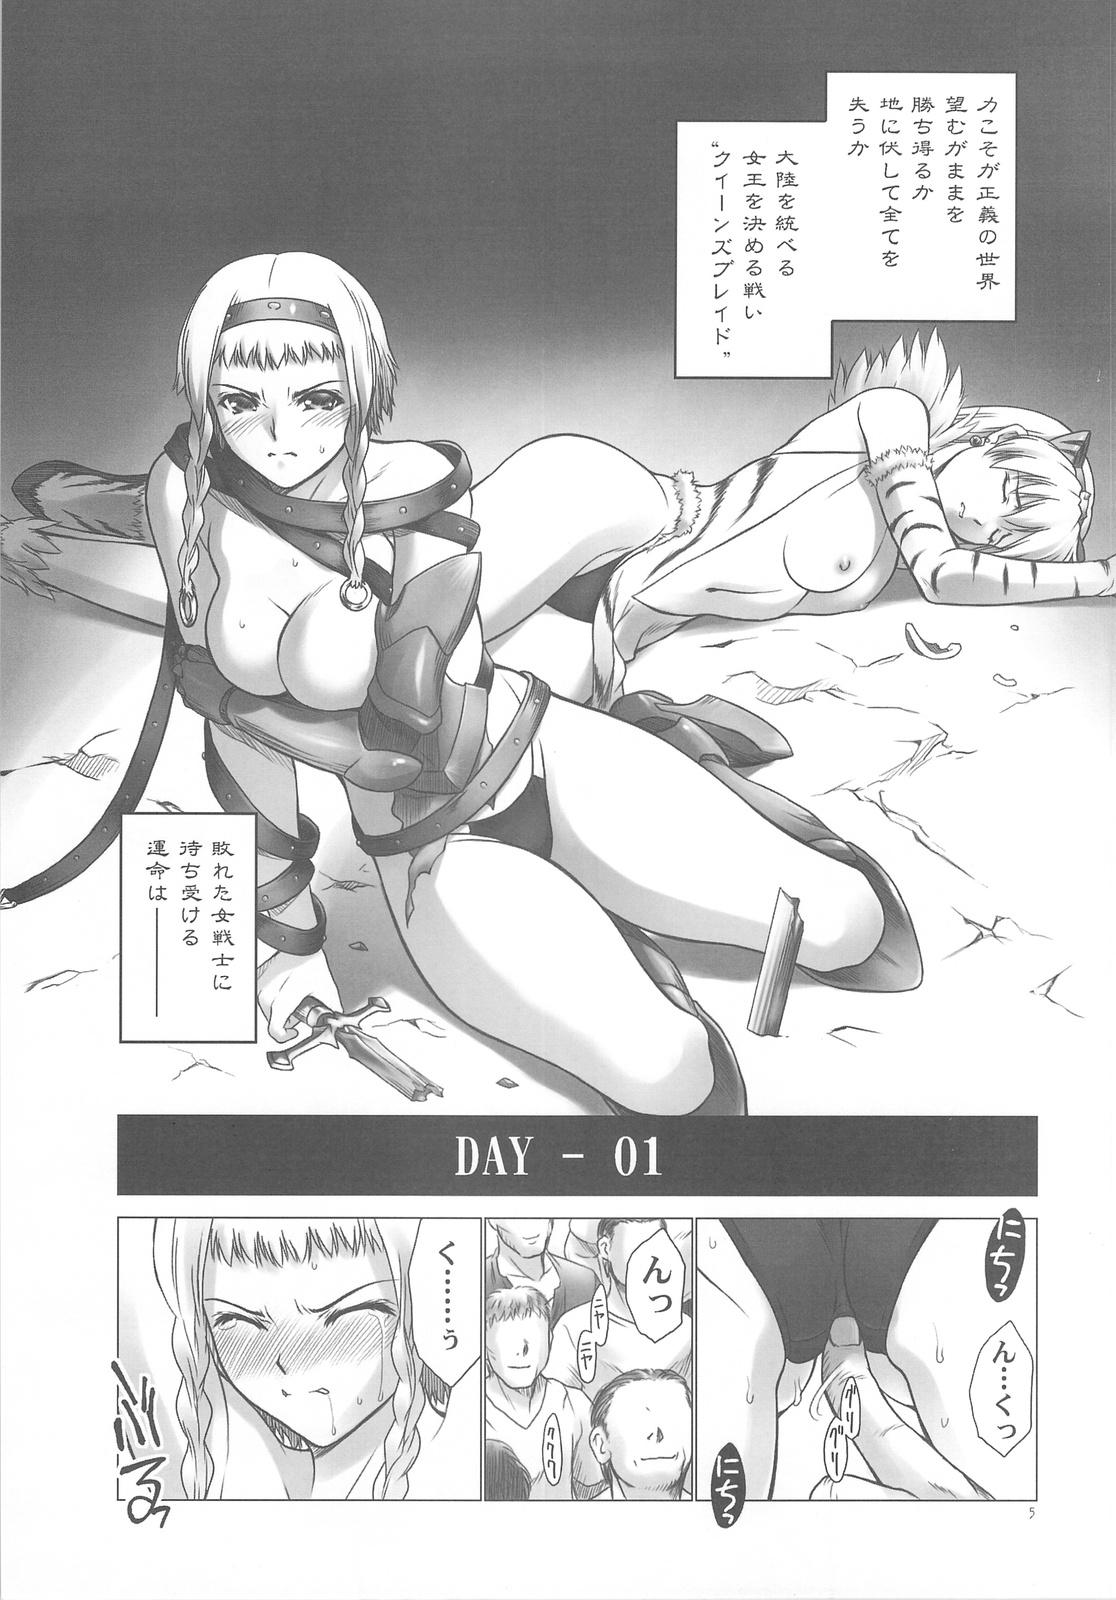 Wives QB - Queens blade Nasty - Page 4